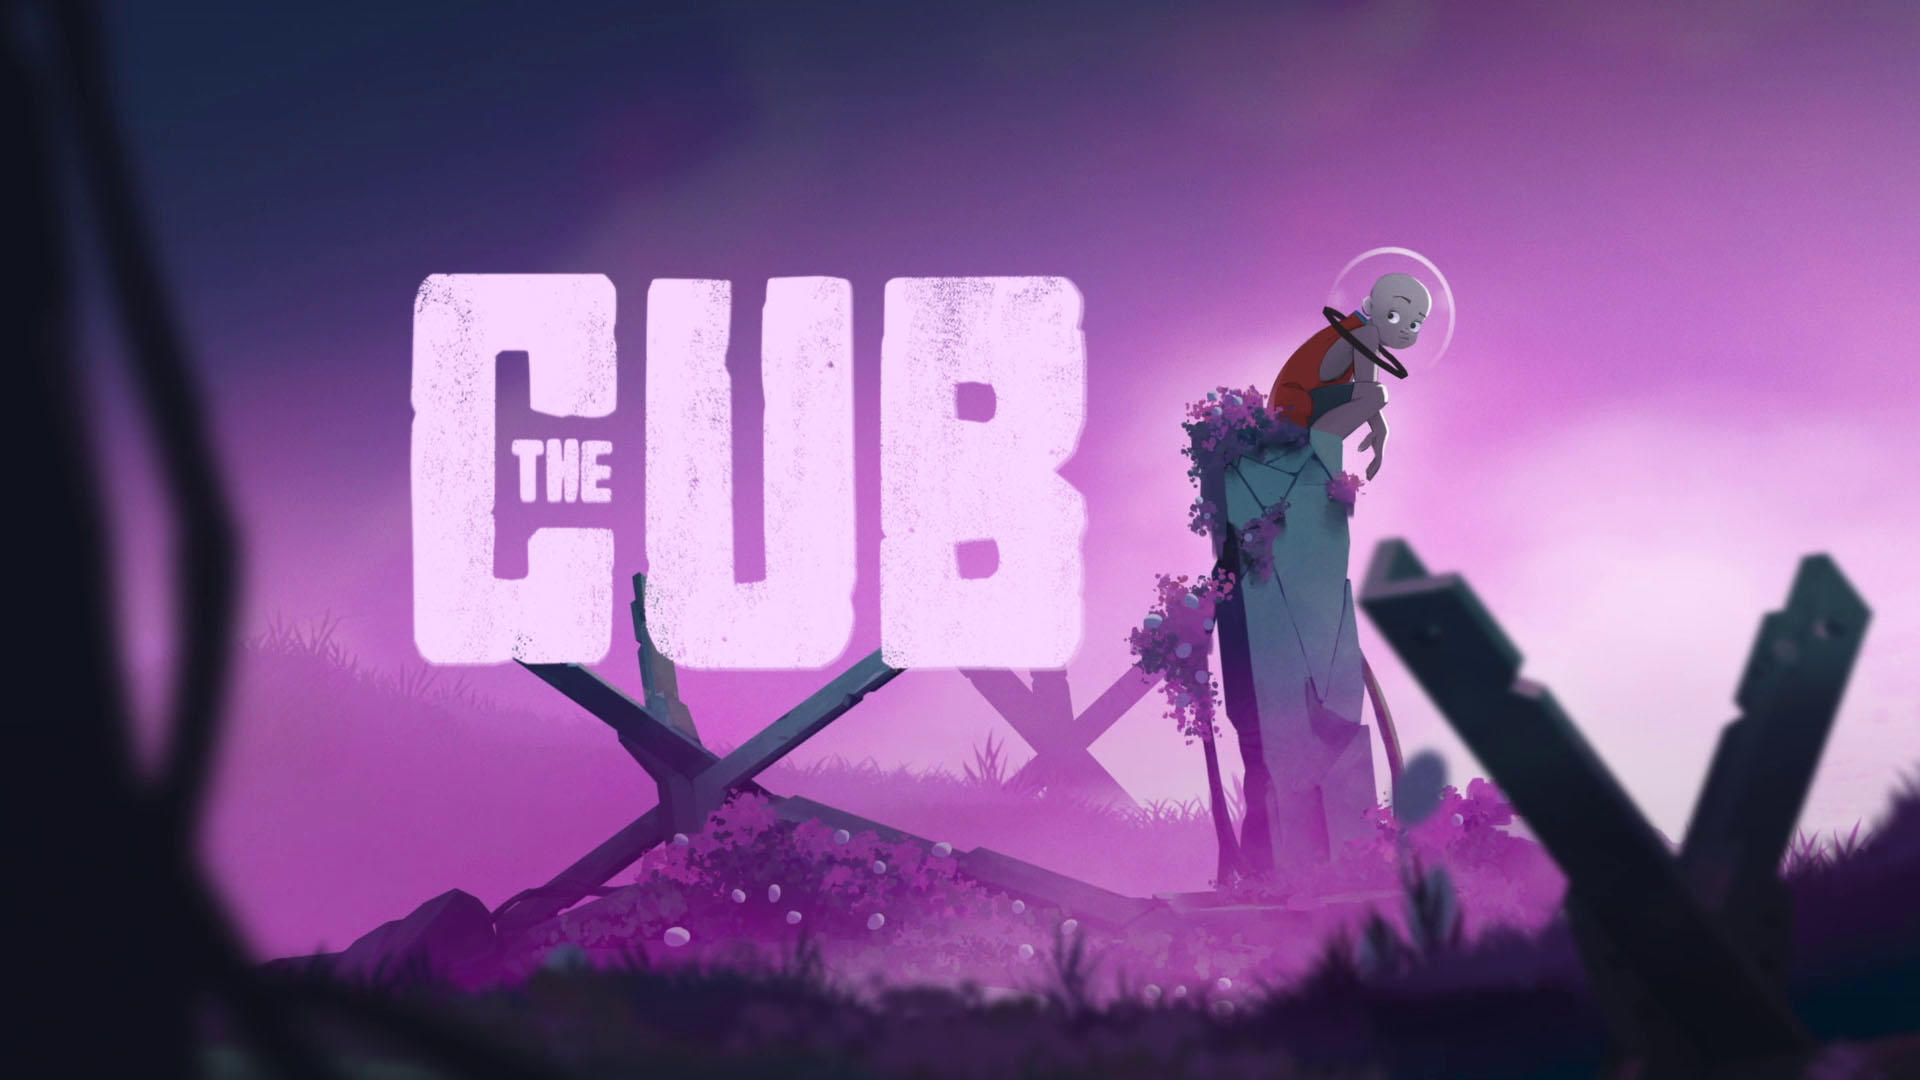 The Cub丨Comes to PC, PlayStation, and Nintendo Switch on January 19th 2024! Free demo on Steam now.